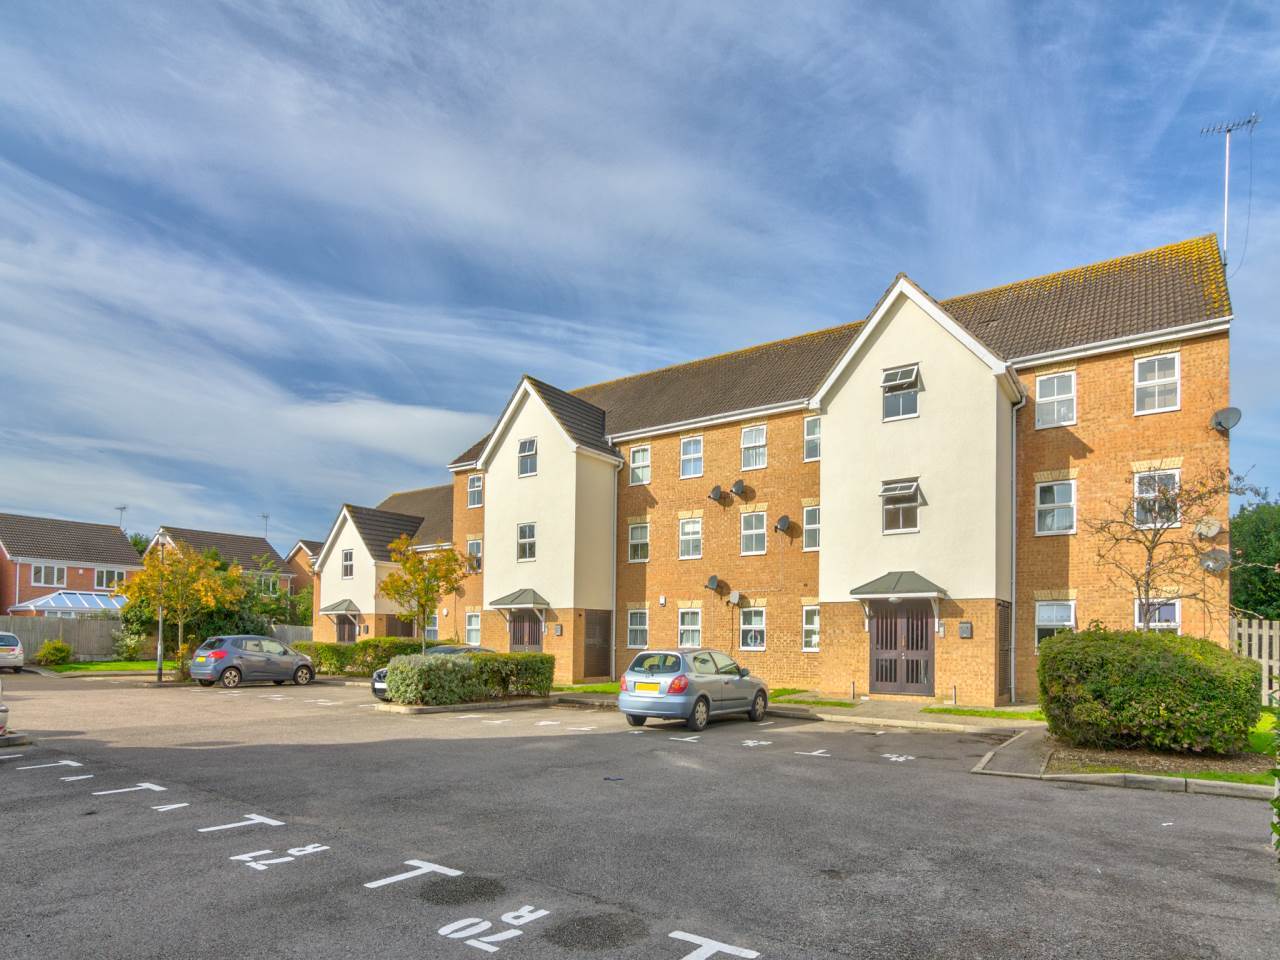 2 bed flat for sale in Osprey Road, Waltham Abbey - Property Image 1